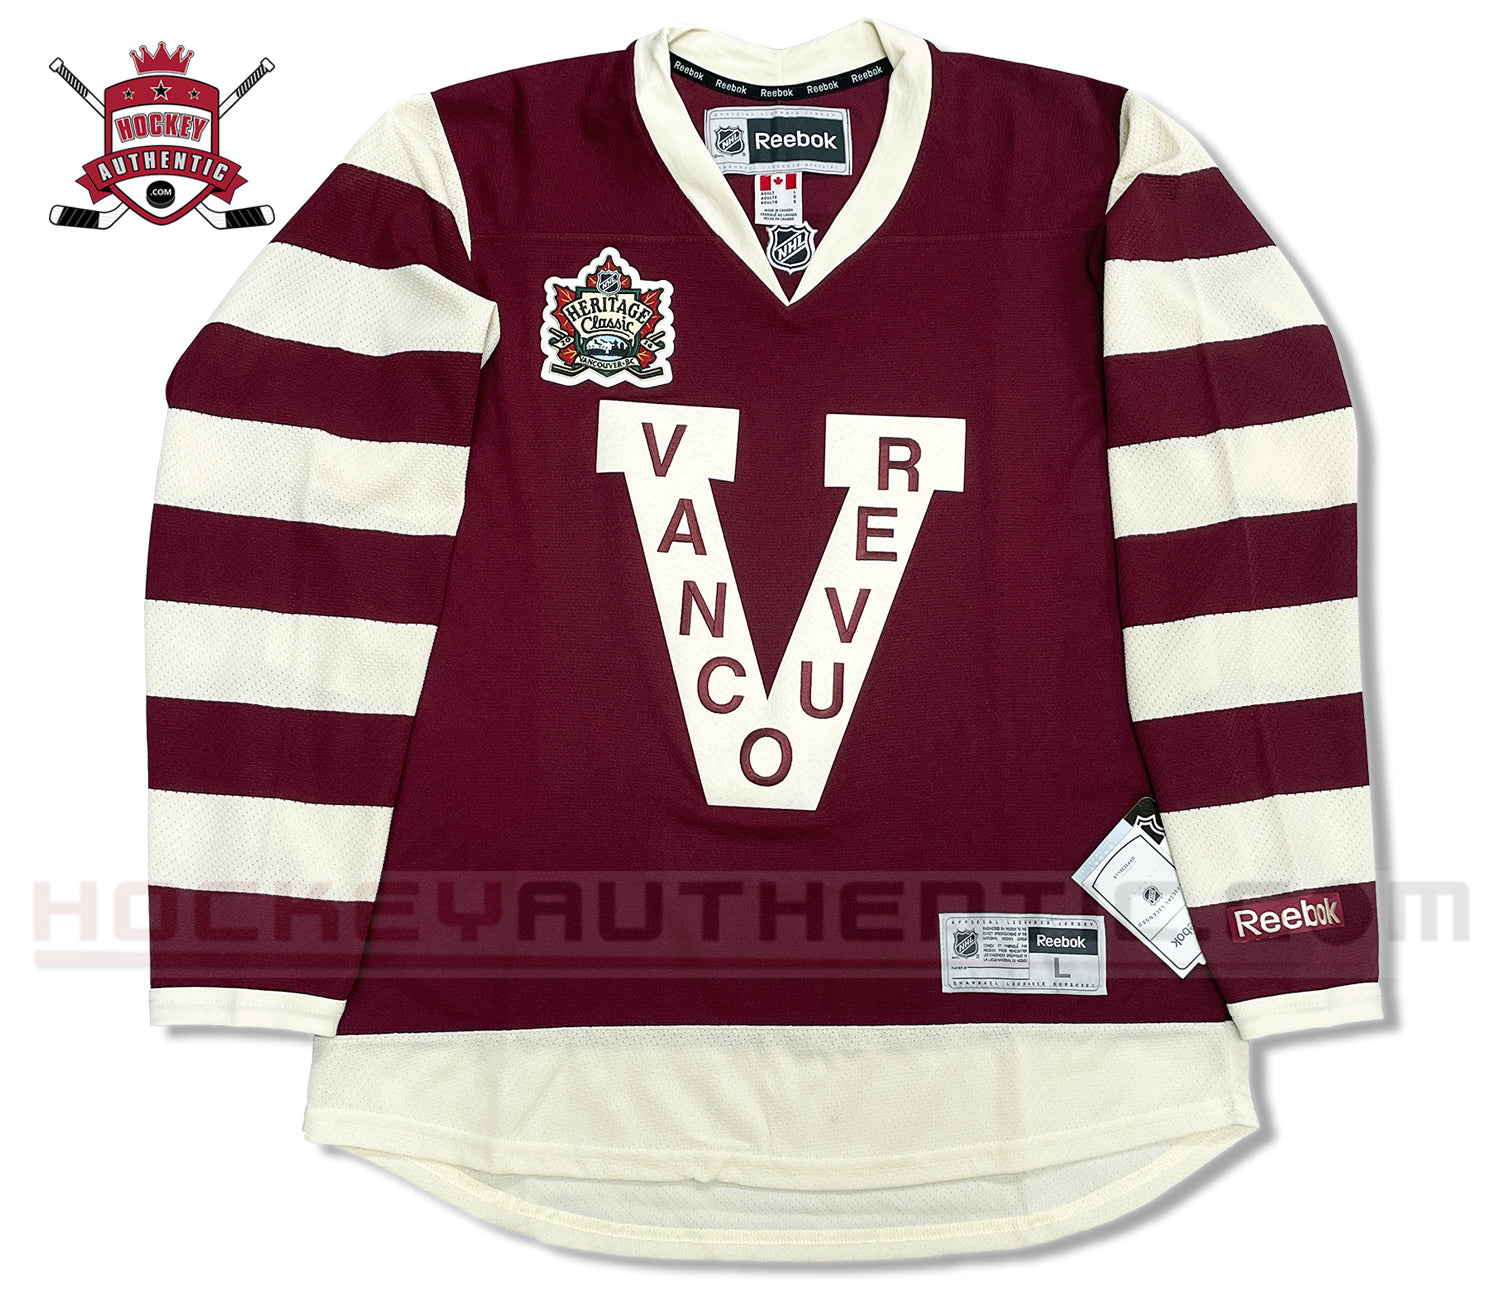 MEN-NWT-LG BLANK VANCOUVER CANUCKS MILLIONAIRES 2014 HERITAGE CLASSIC RBK  JERSEY